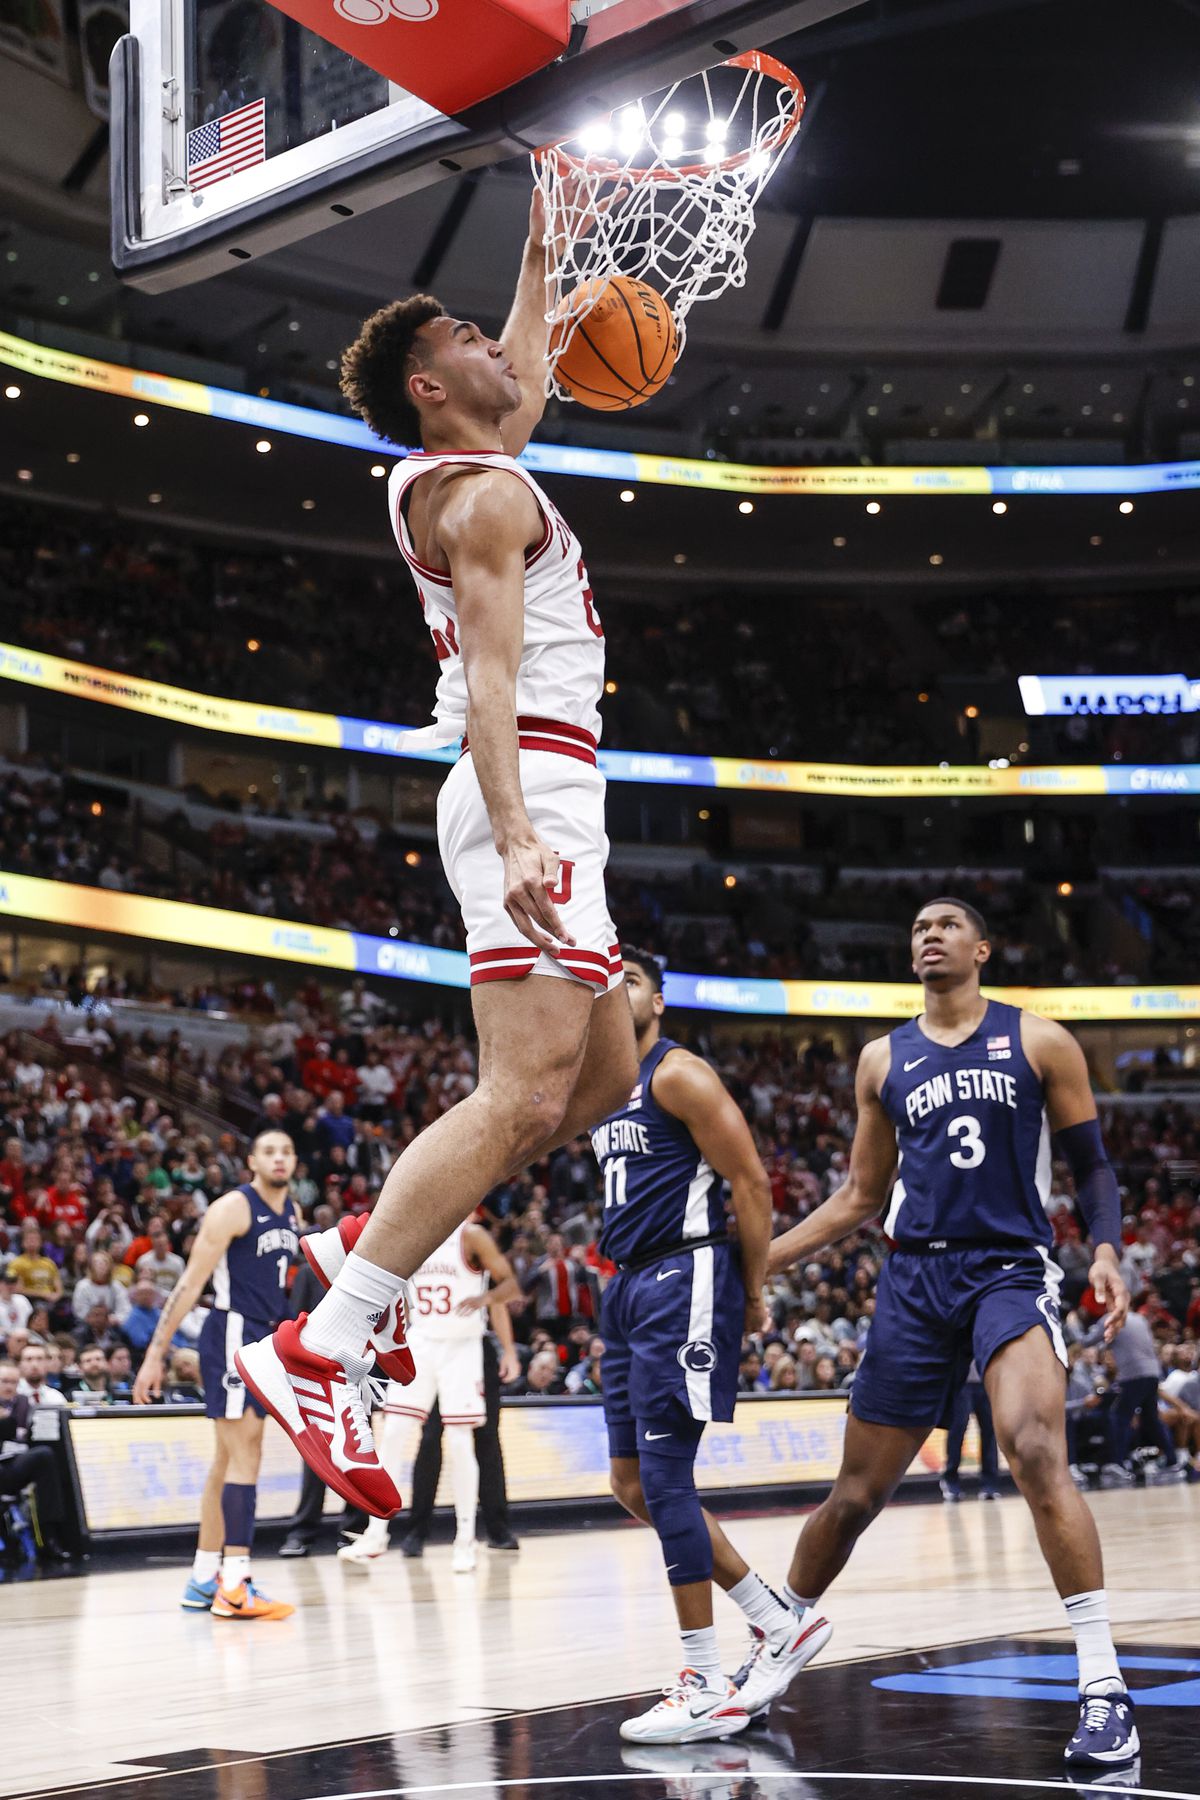 NCAA Basketball: Big Ten Conference Tournament Semifinals - Penn State vs Indiana